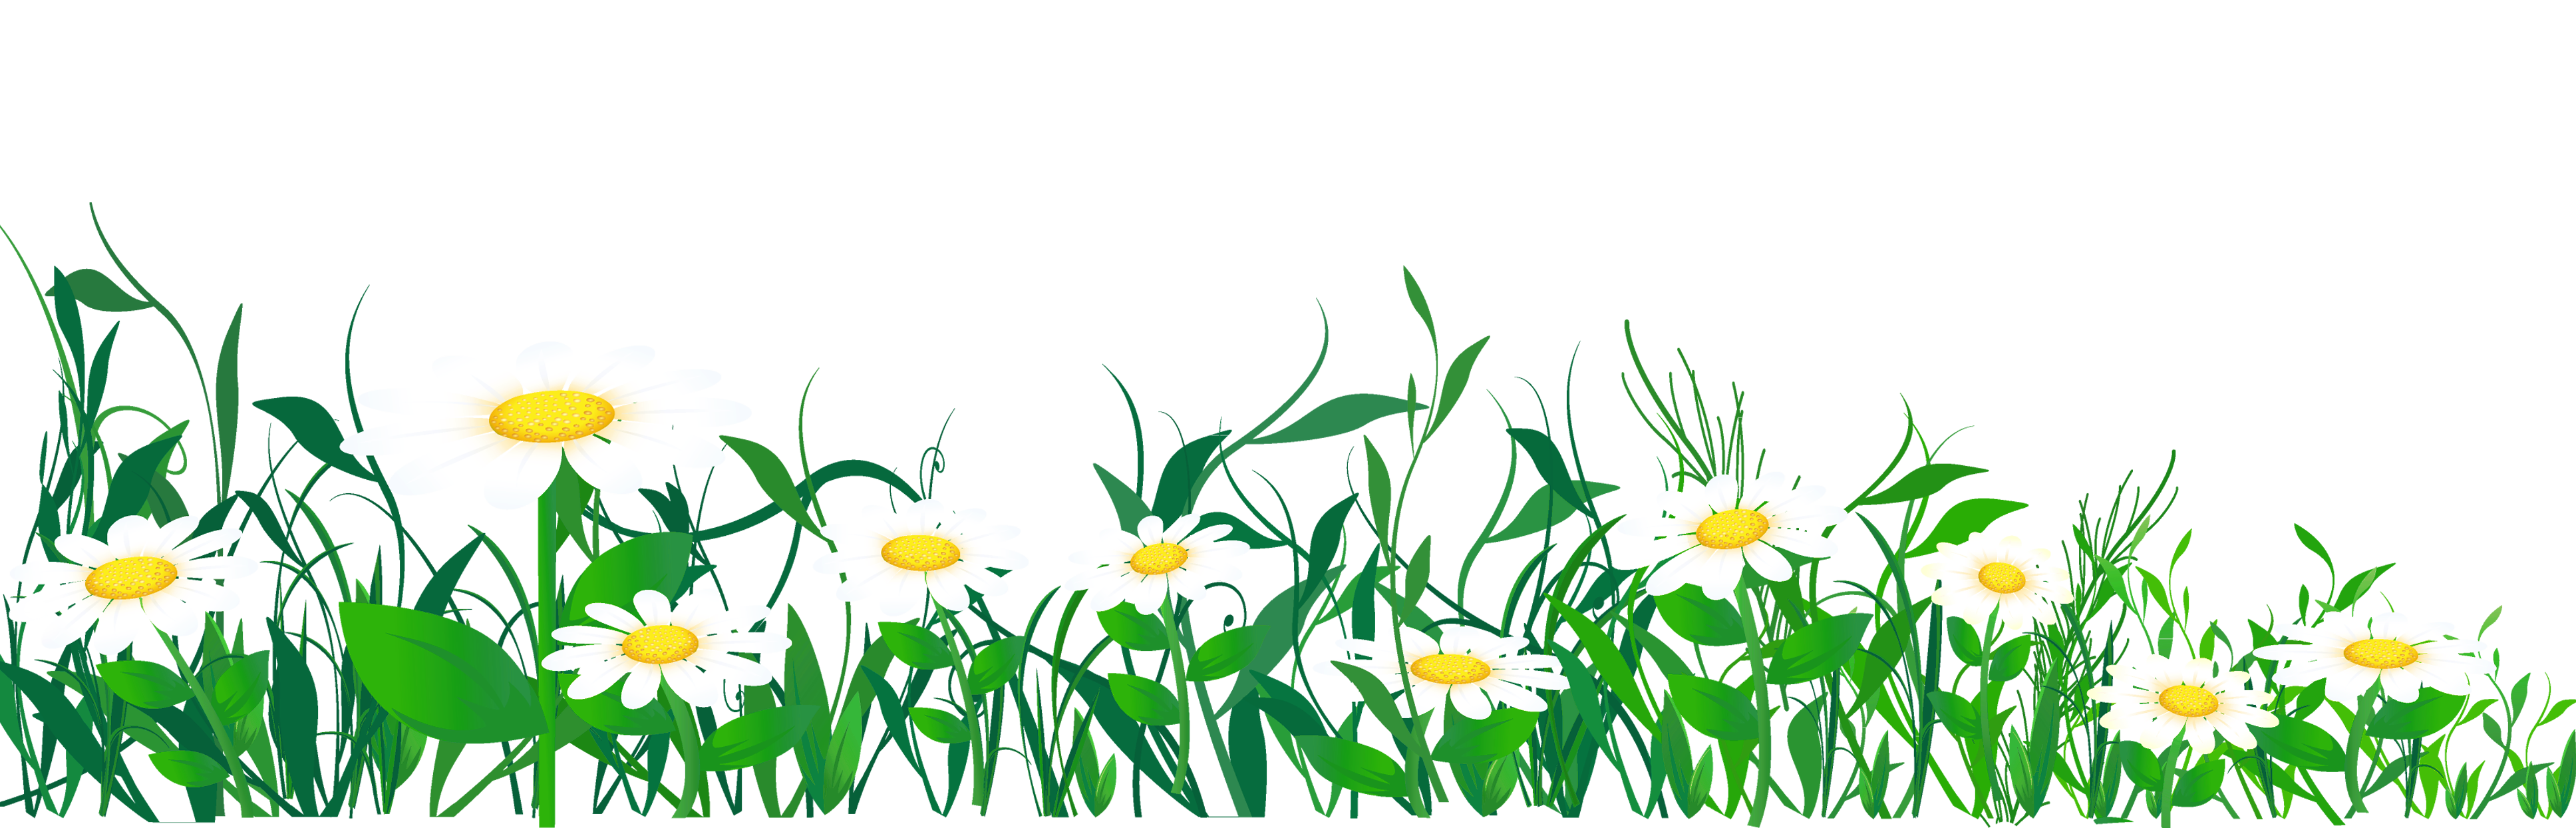 Picture Of Daisies